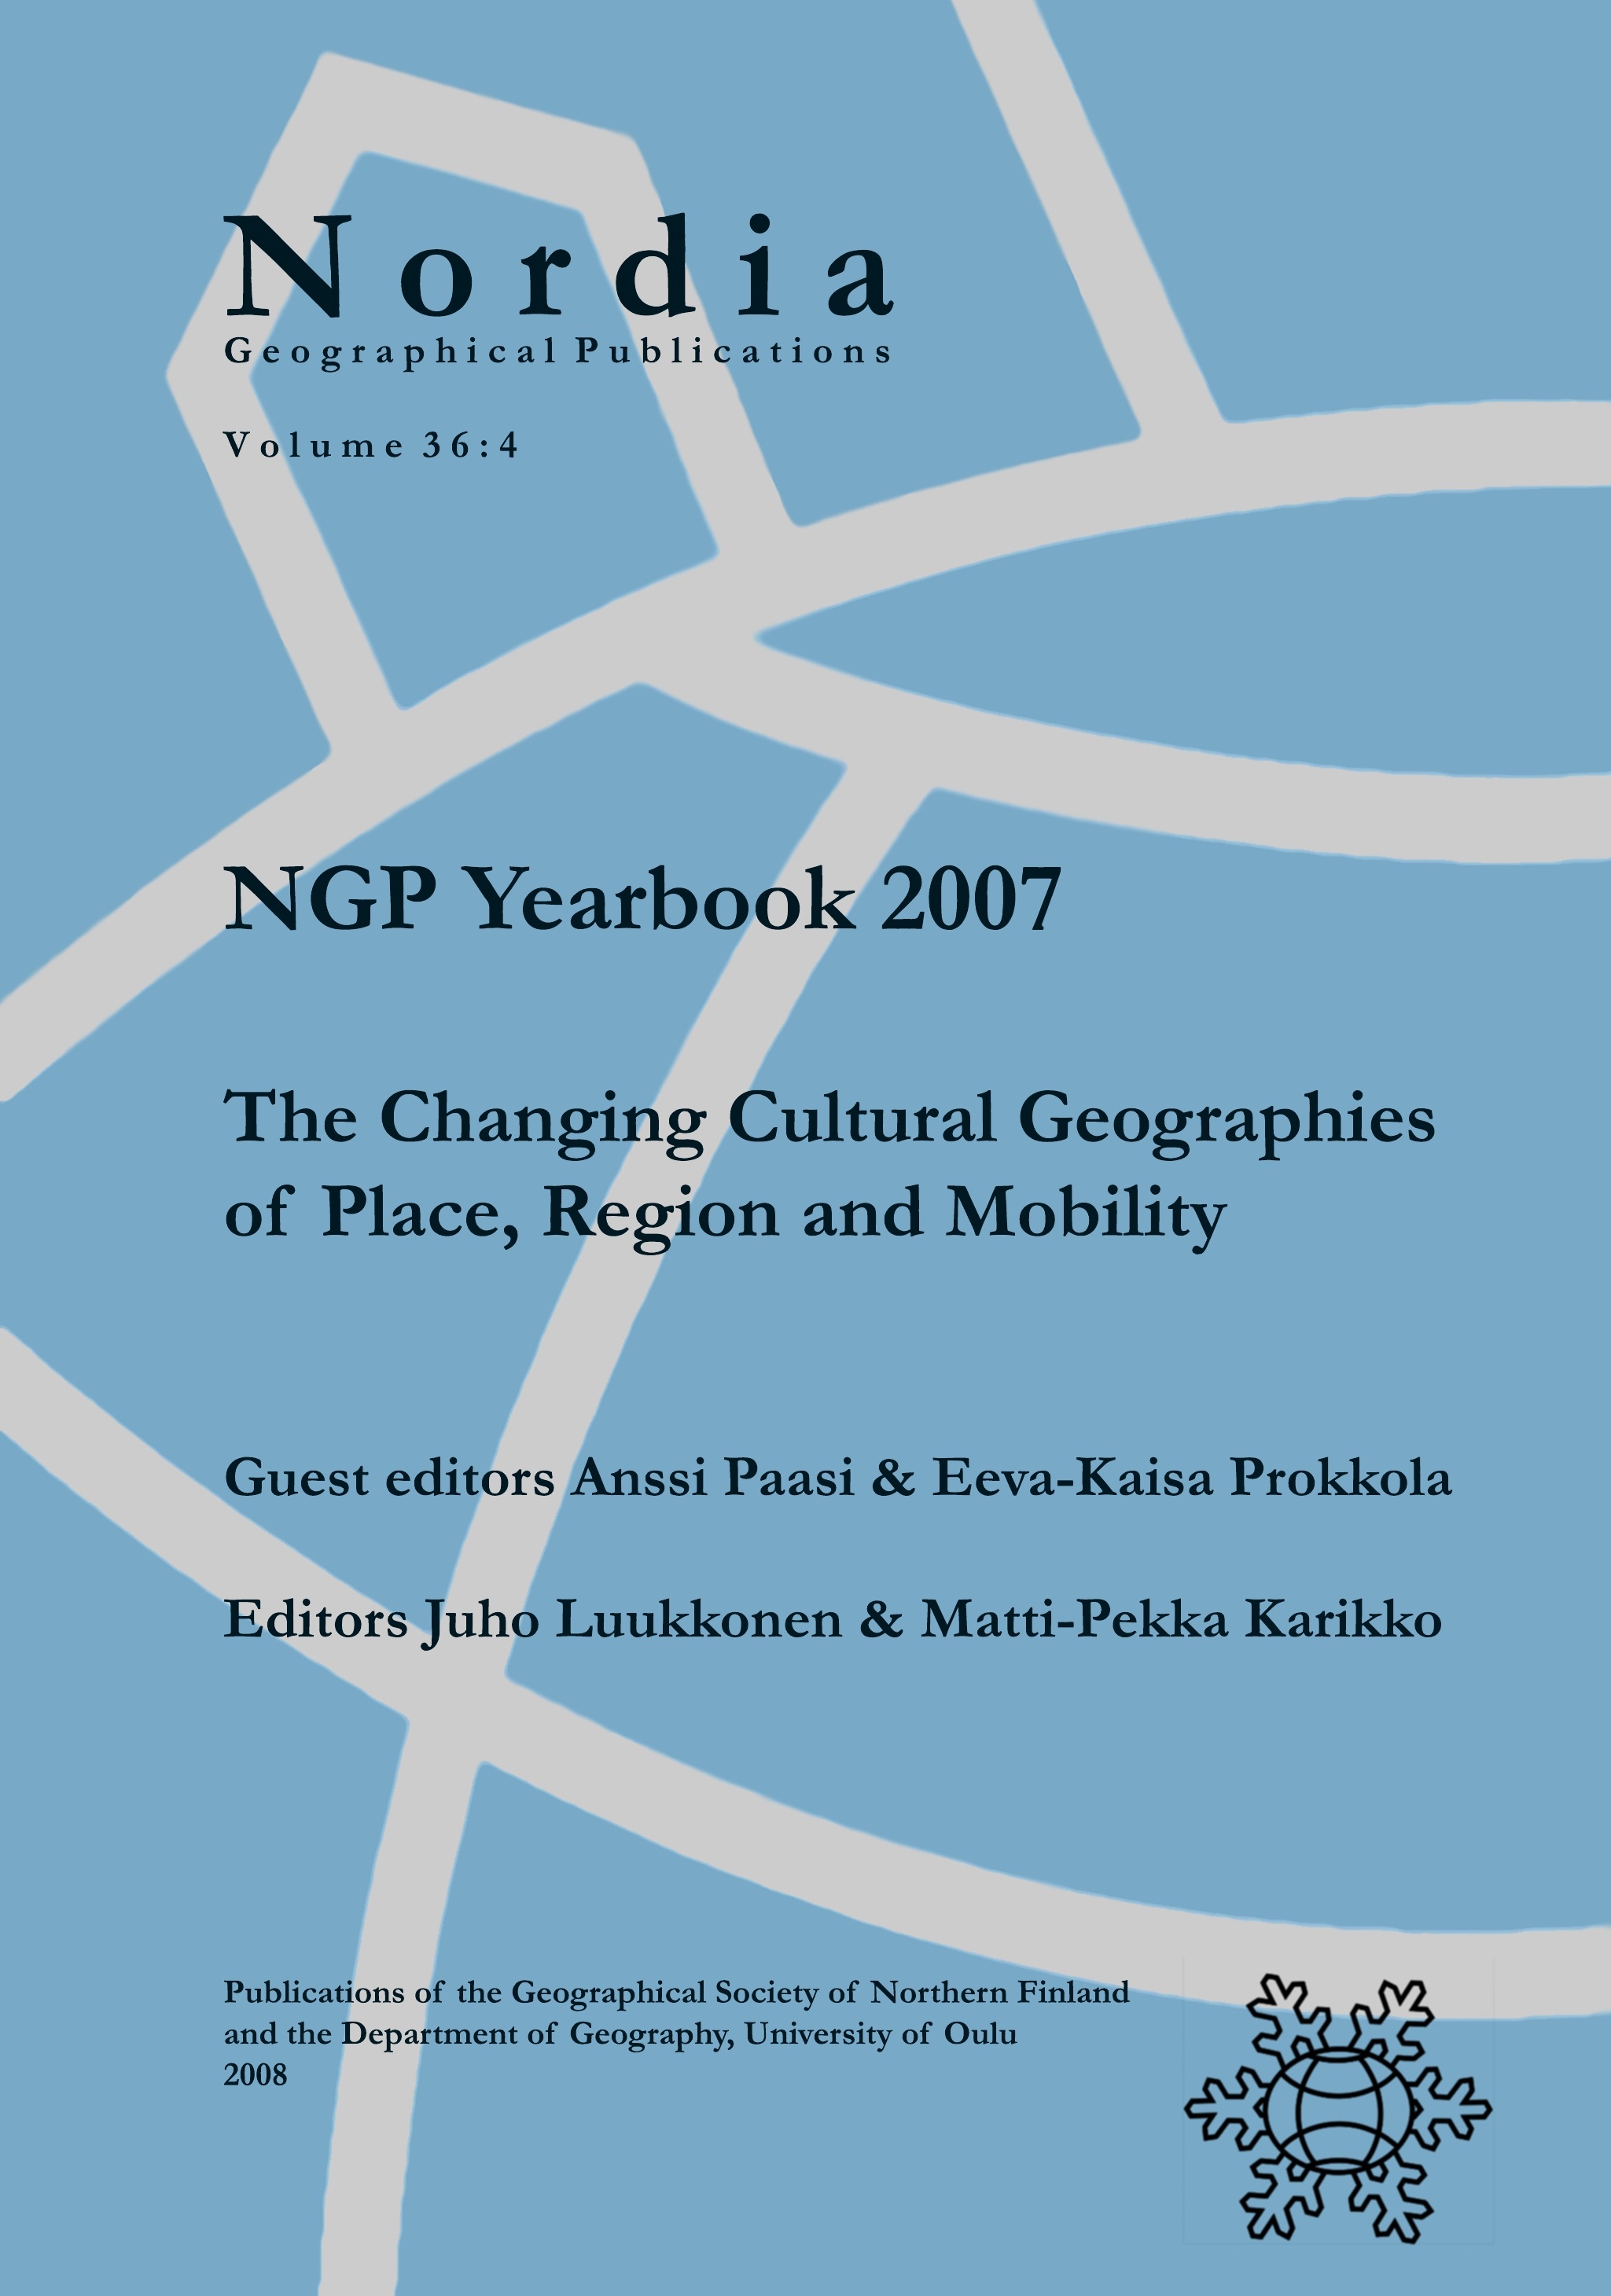 					Näytä Vol 36 Nro 4: NGP Yearbook 2007: The Changing Cultural Geographies of Place, Region and Mobility
				